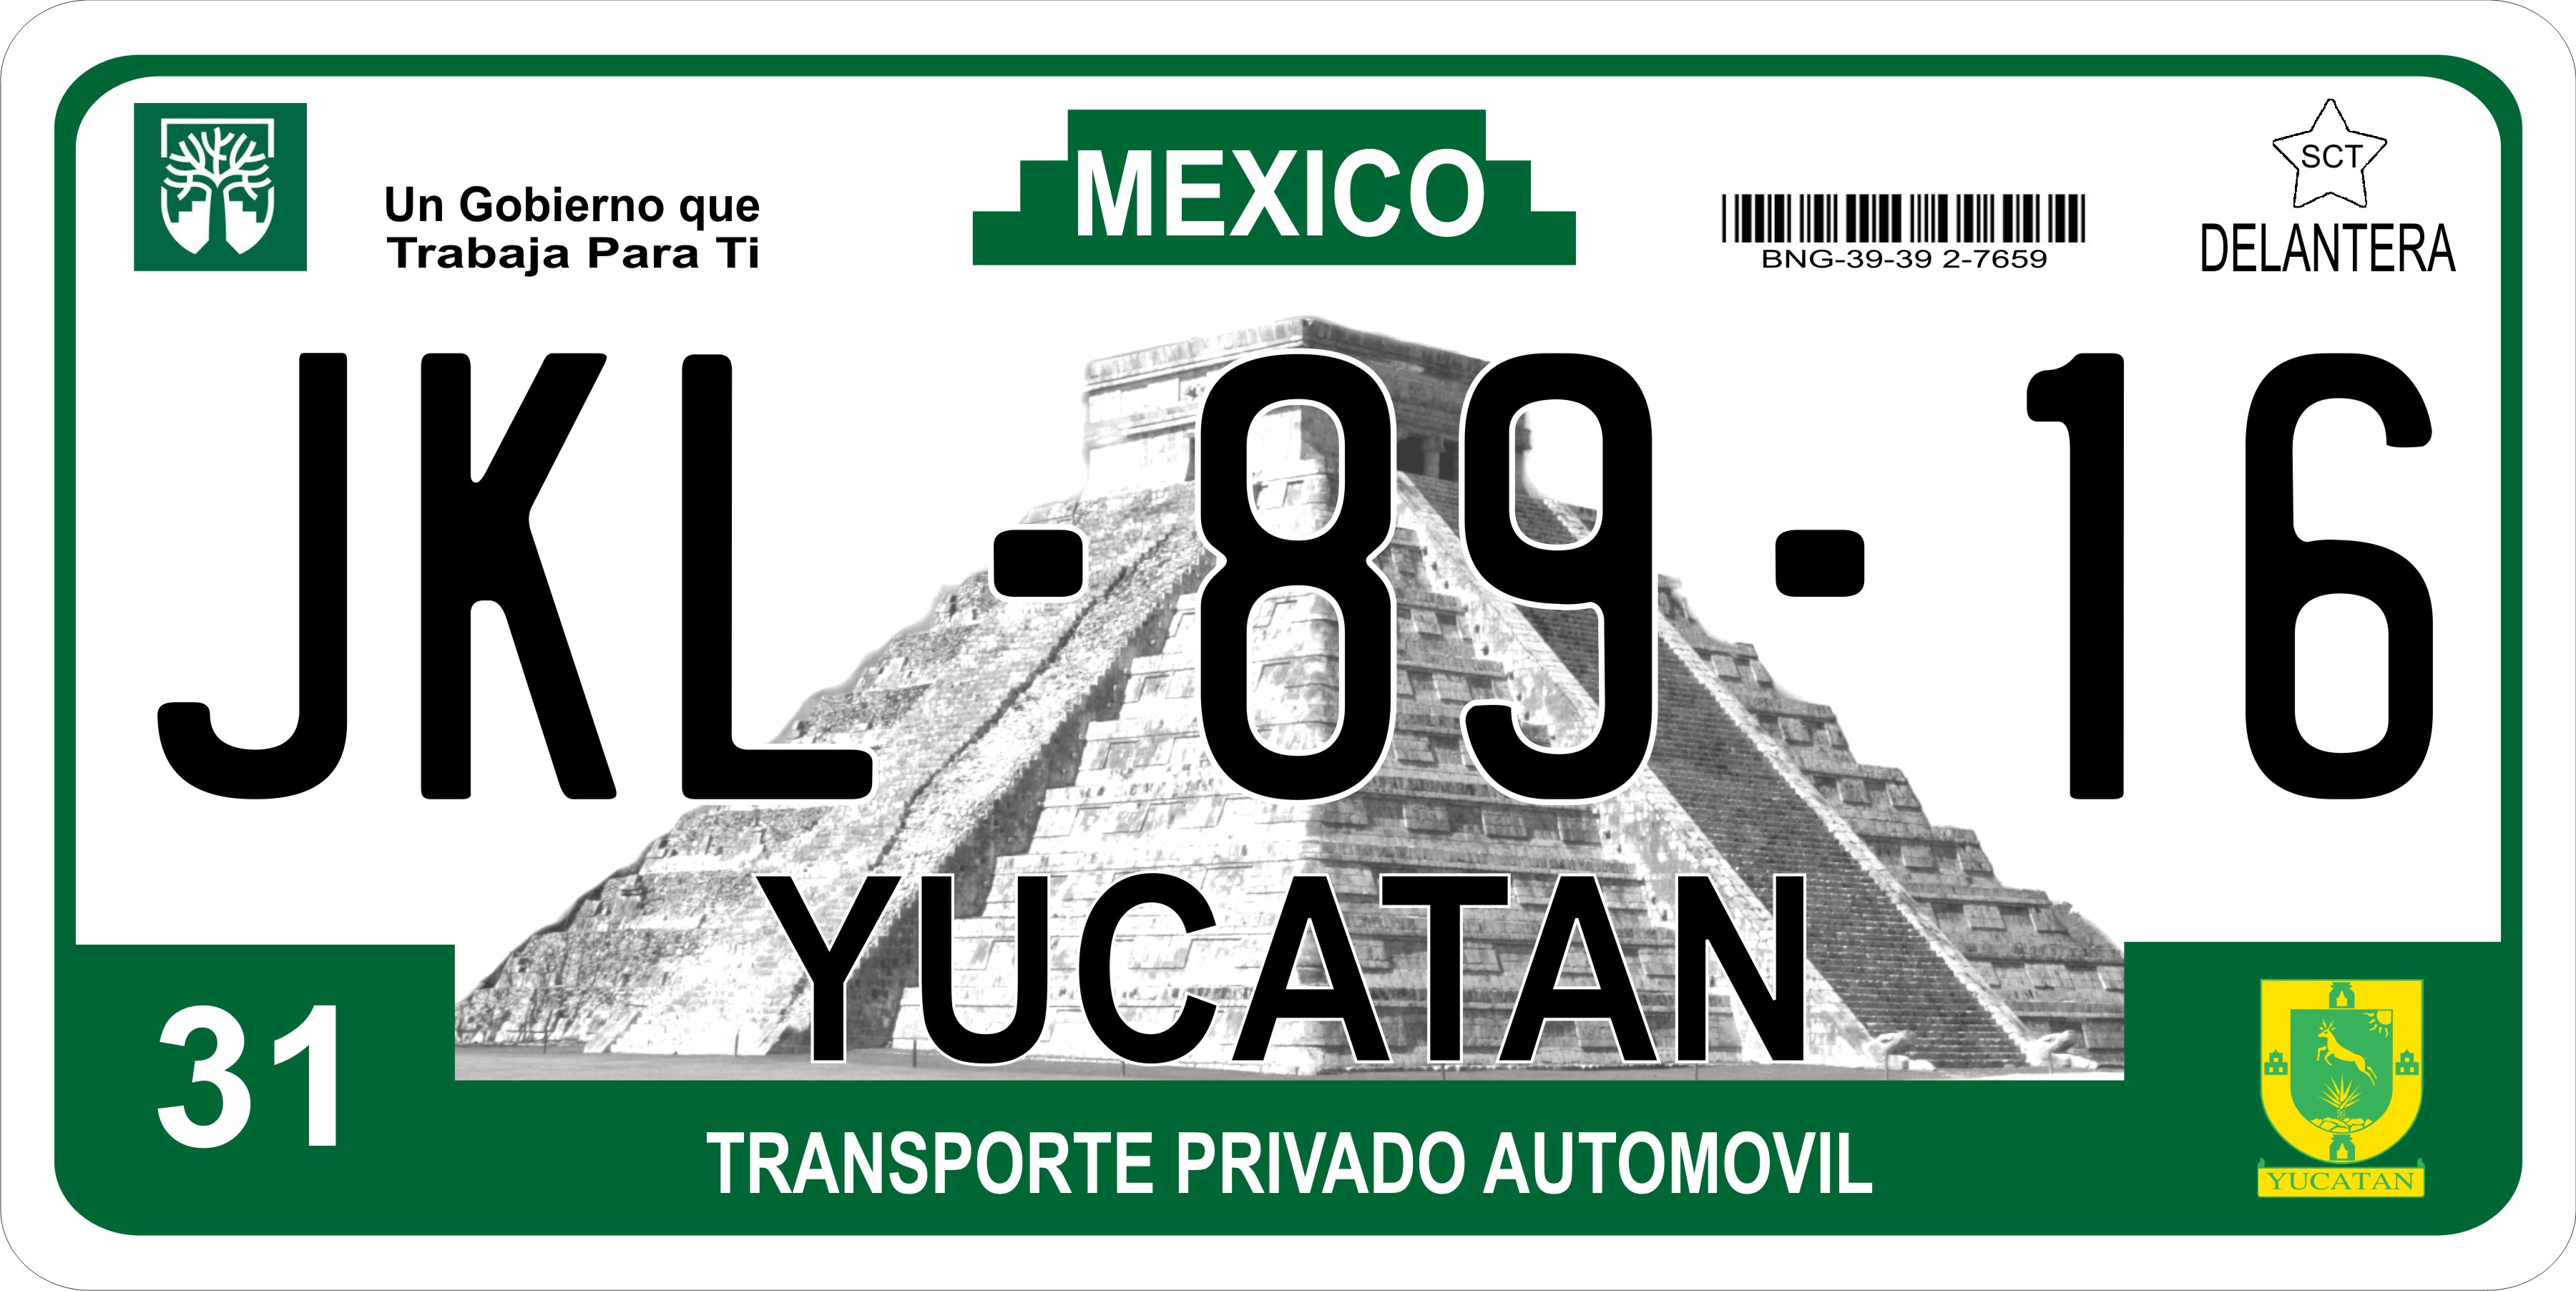 Mexico Yucatan Photo LICENSE PLATE Free Personalization on this PLATE